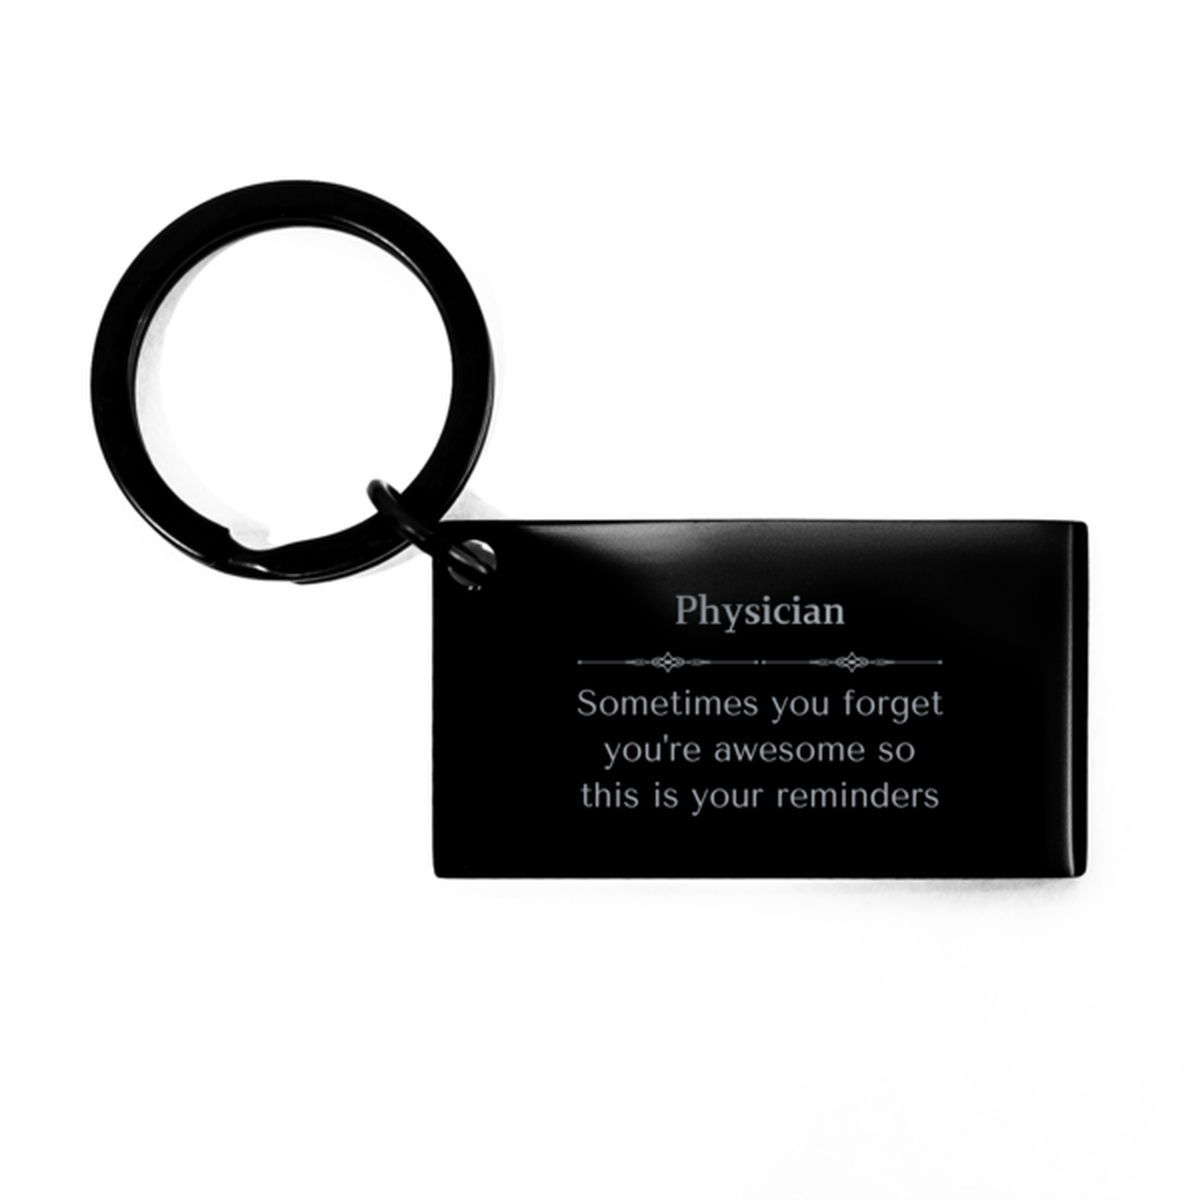 Sentimental Physician Keychain, Sales Representative Sometimes you forget you're awesome so this is your reminders, Graduation Christmas Birthday Gifts for Physician, Men, Women, Coworkers